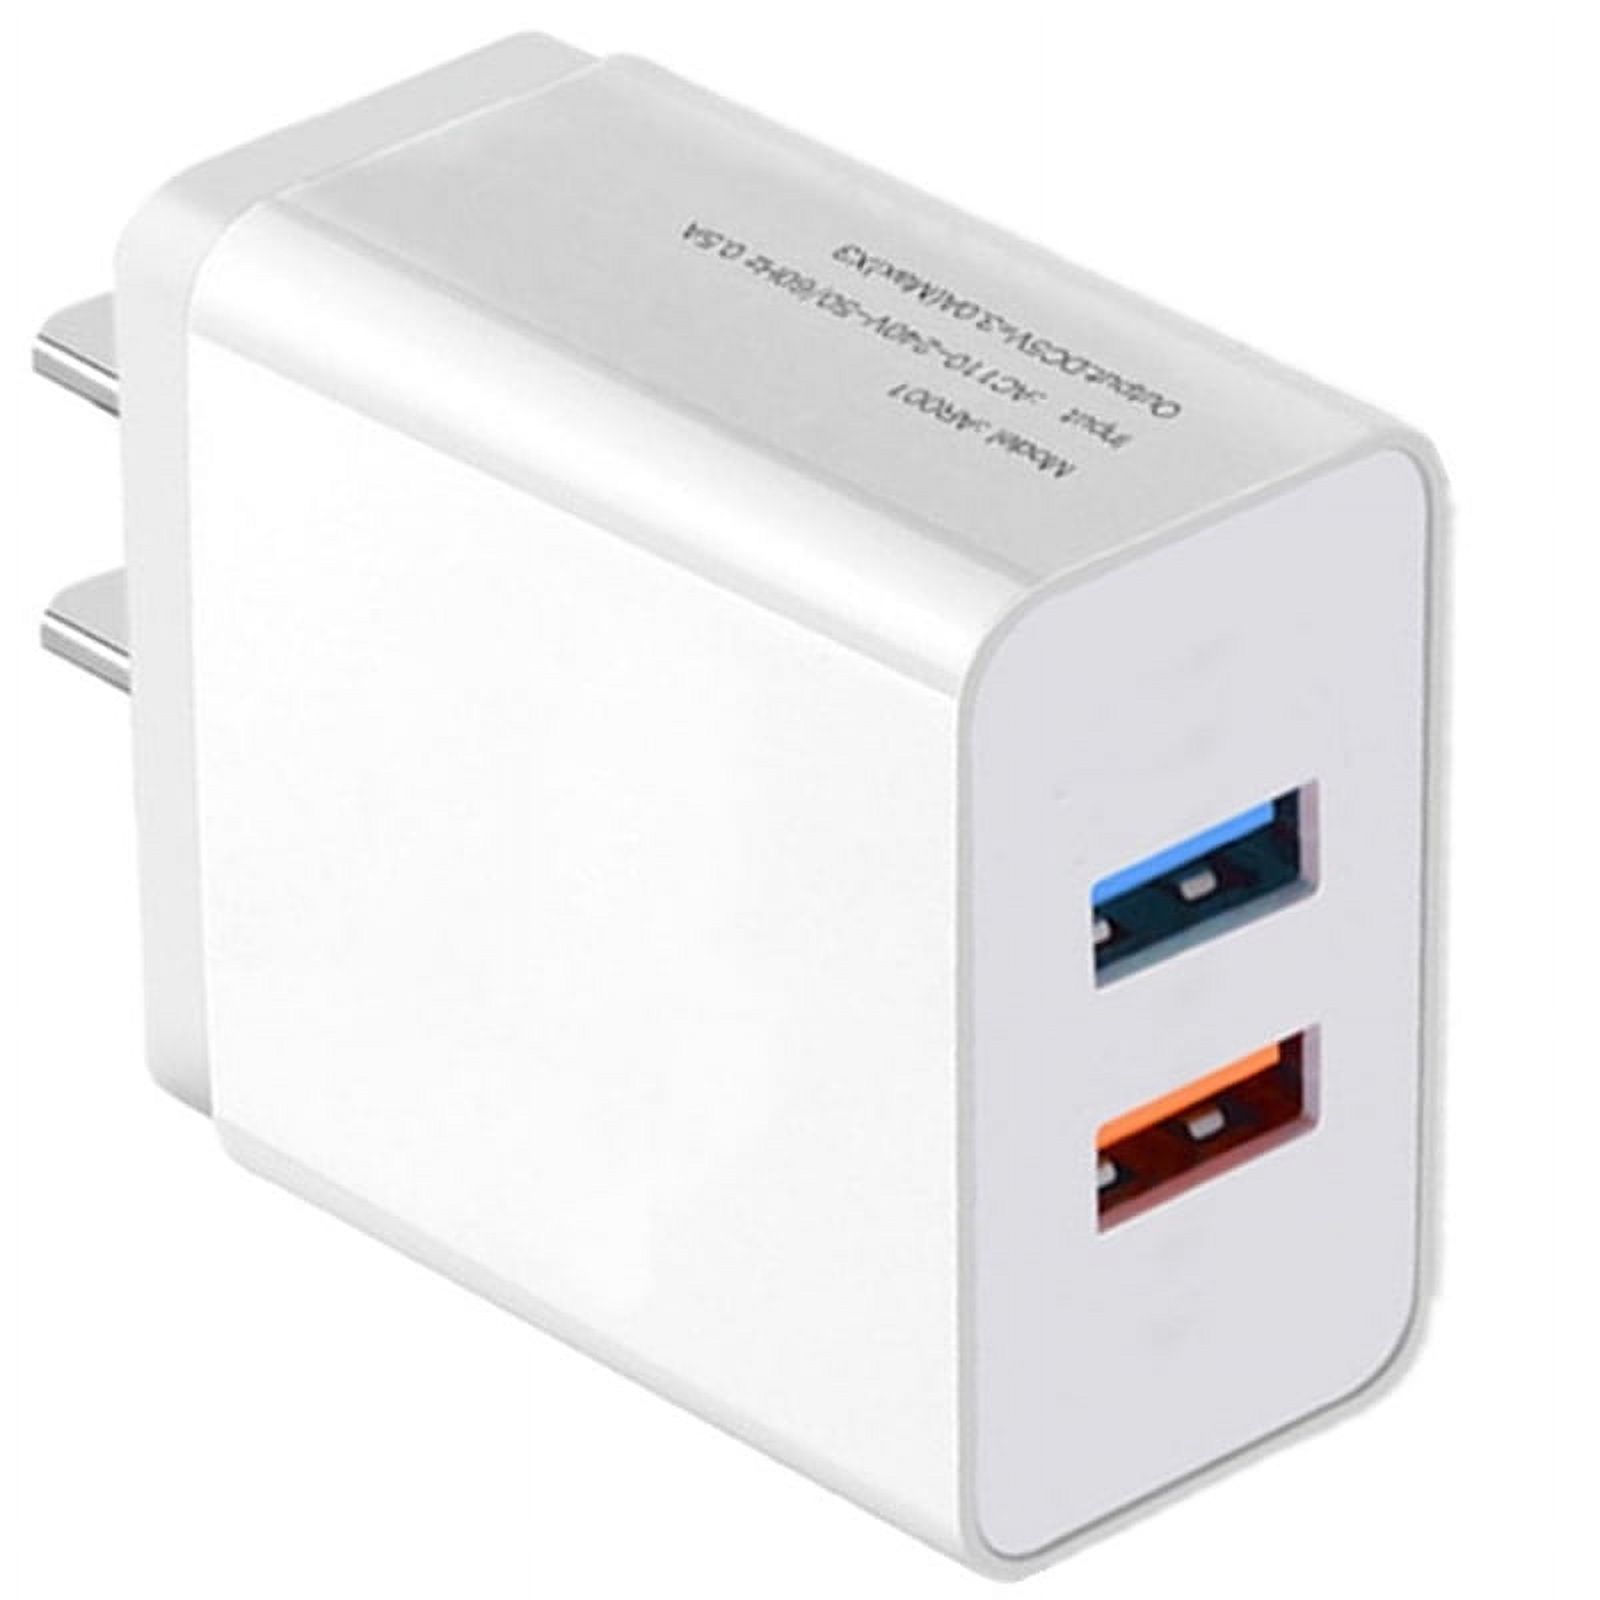 Wall Charger, Upgraded 10W 2-Port USB Plug Cube Portable Wall Charger Plug for iPhone iPad Android Universal for All USB Charging Devices - image 1 of 3